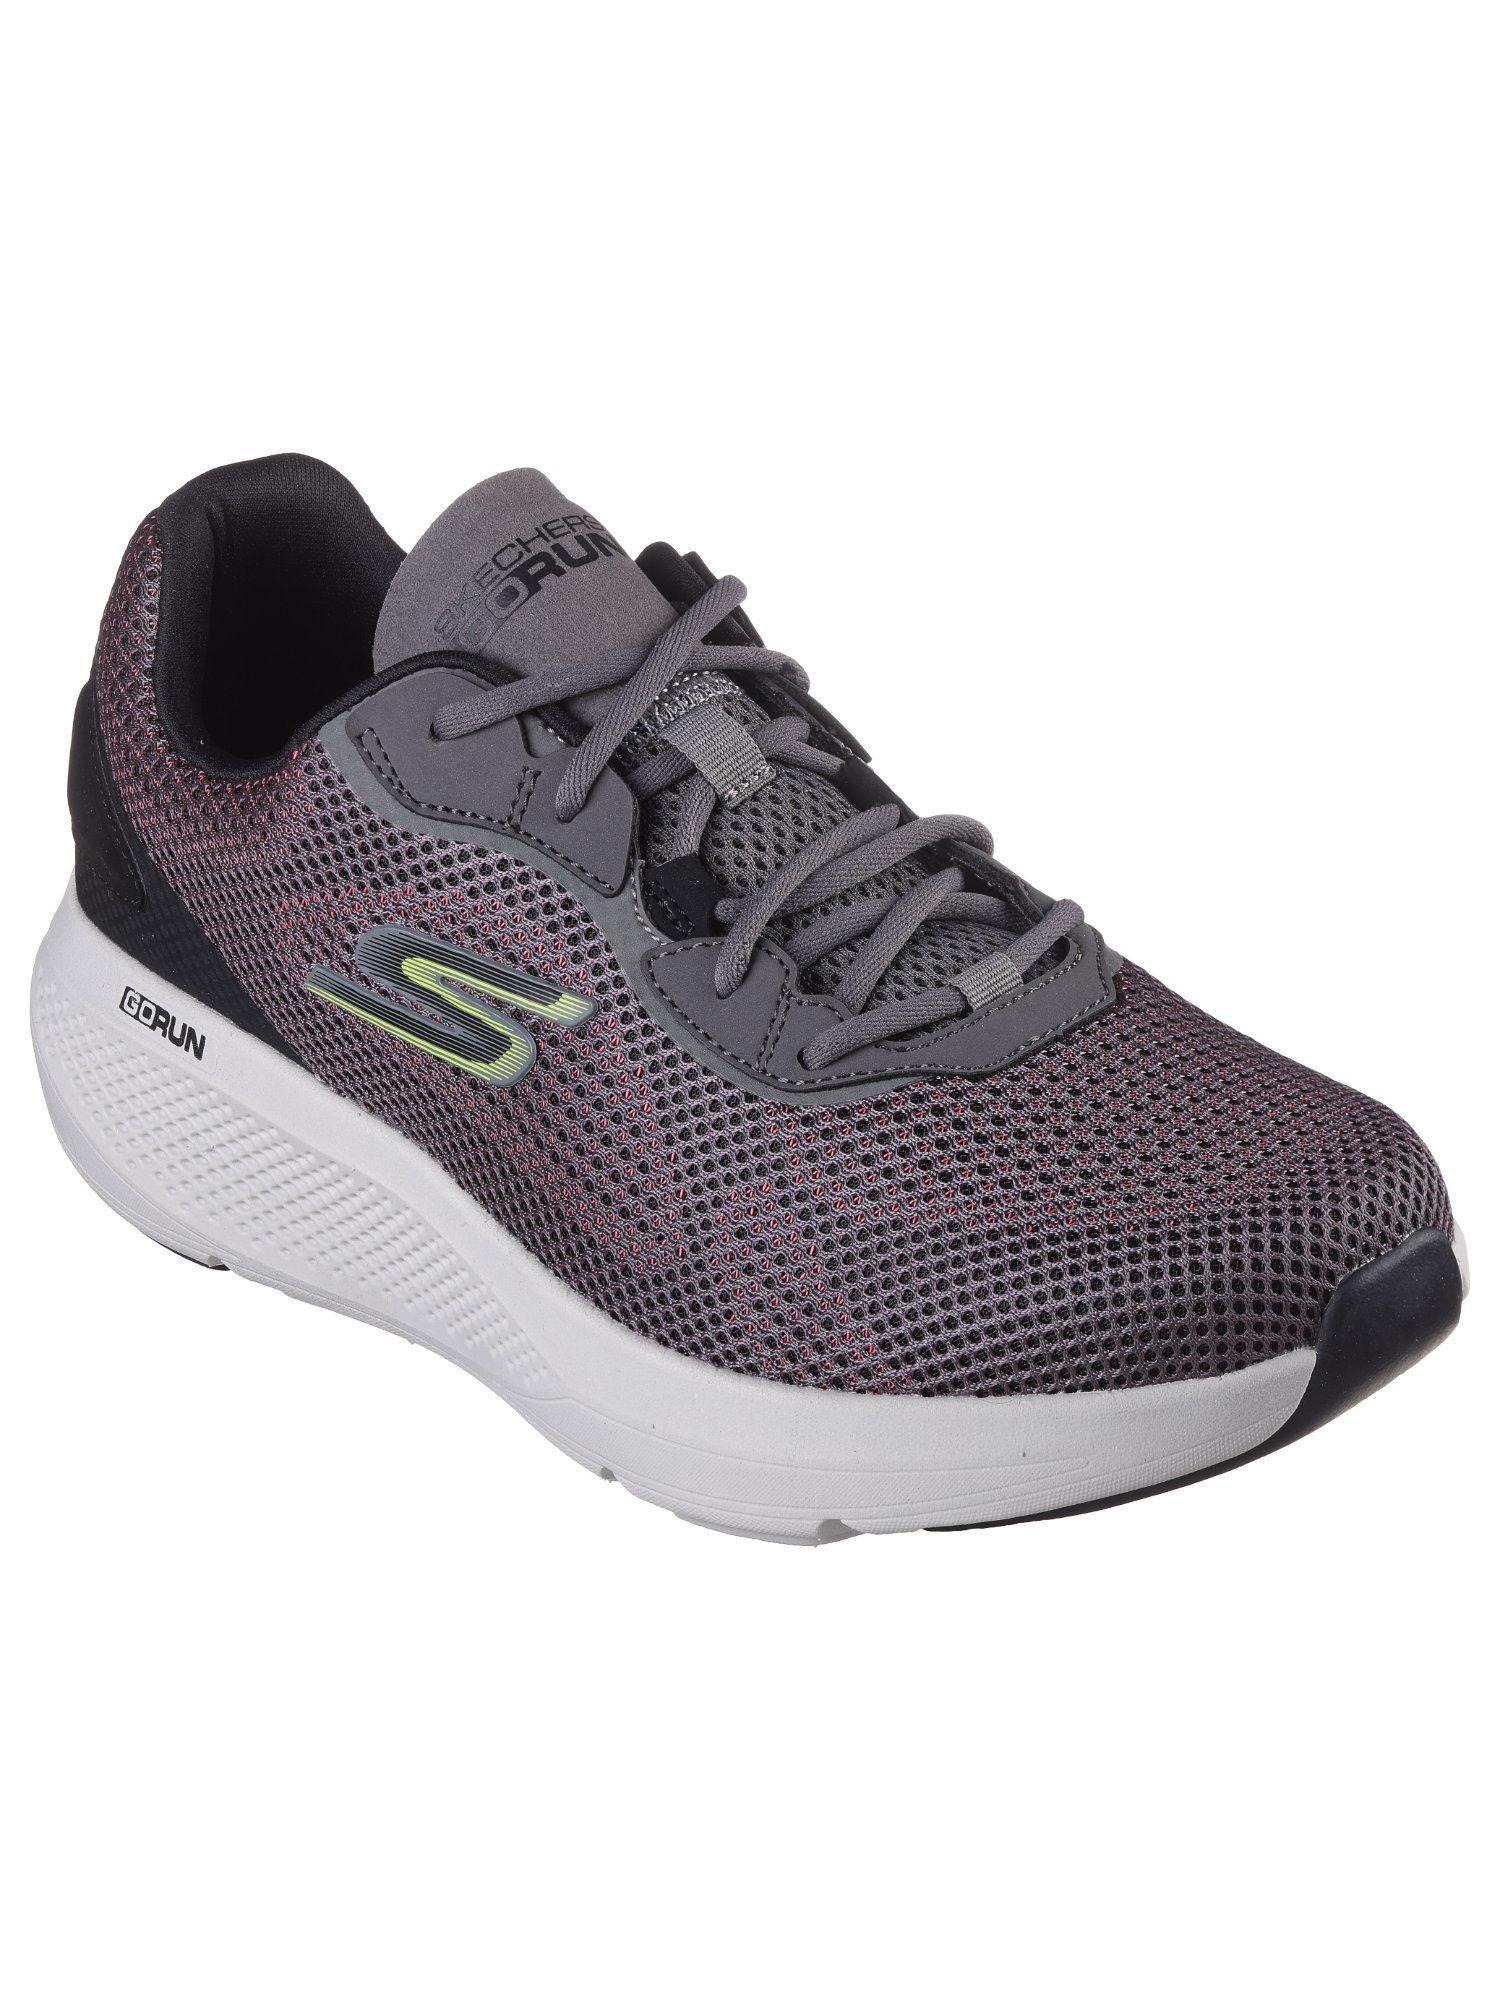 GO RUN ELEVATE FOR Charcoal Running Shoes